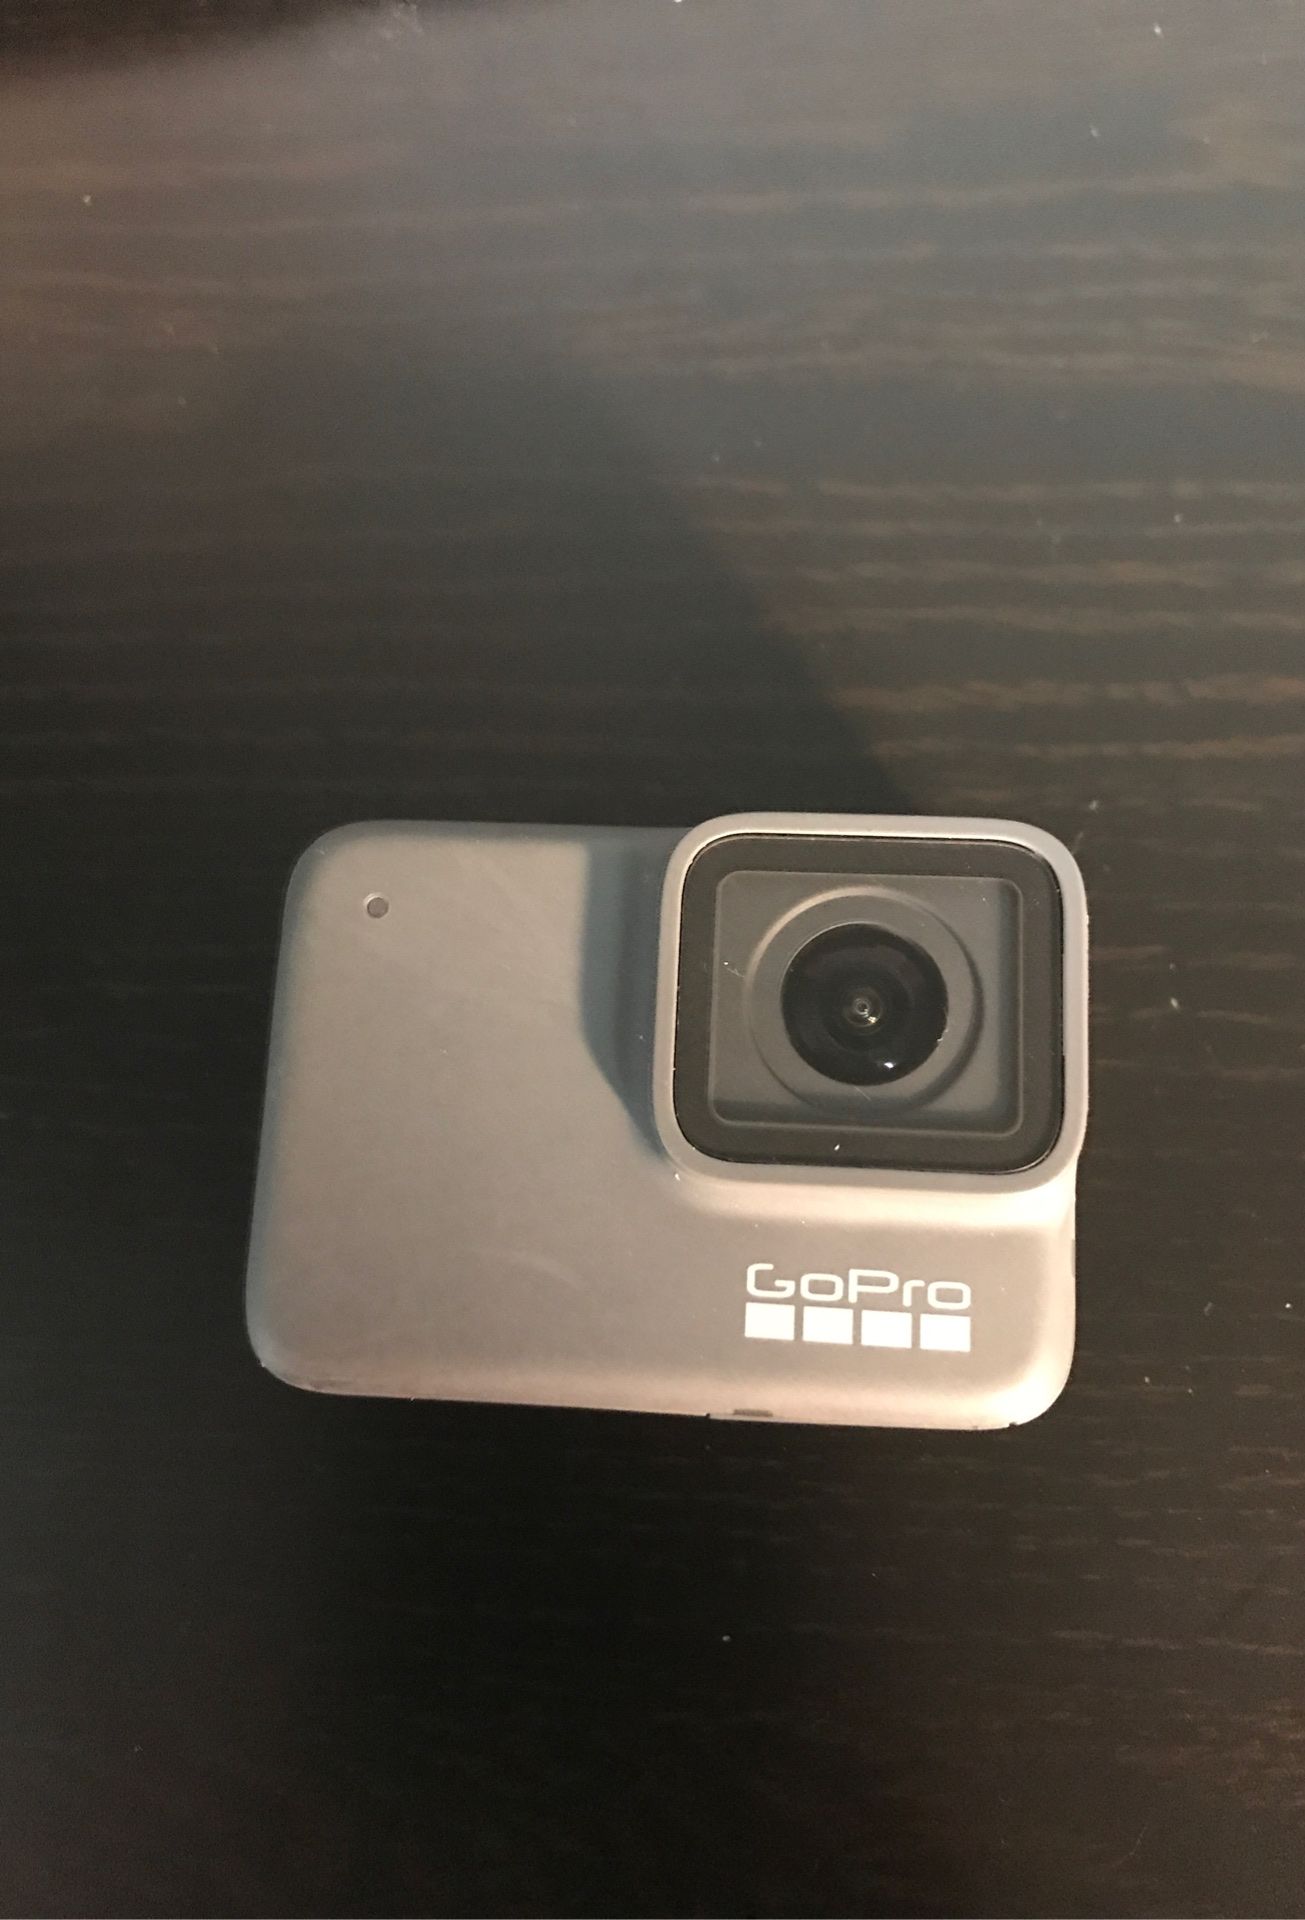 GoPro hero 7 silver, price somewhat negotiable and for trade.